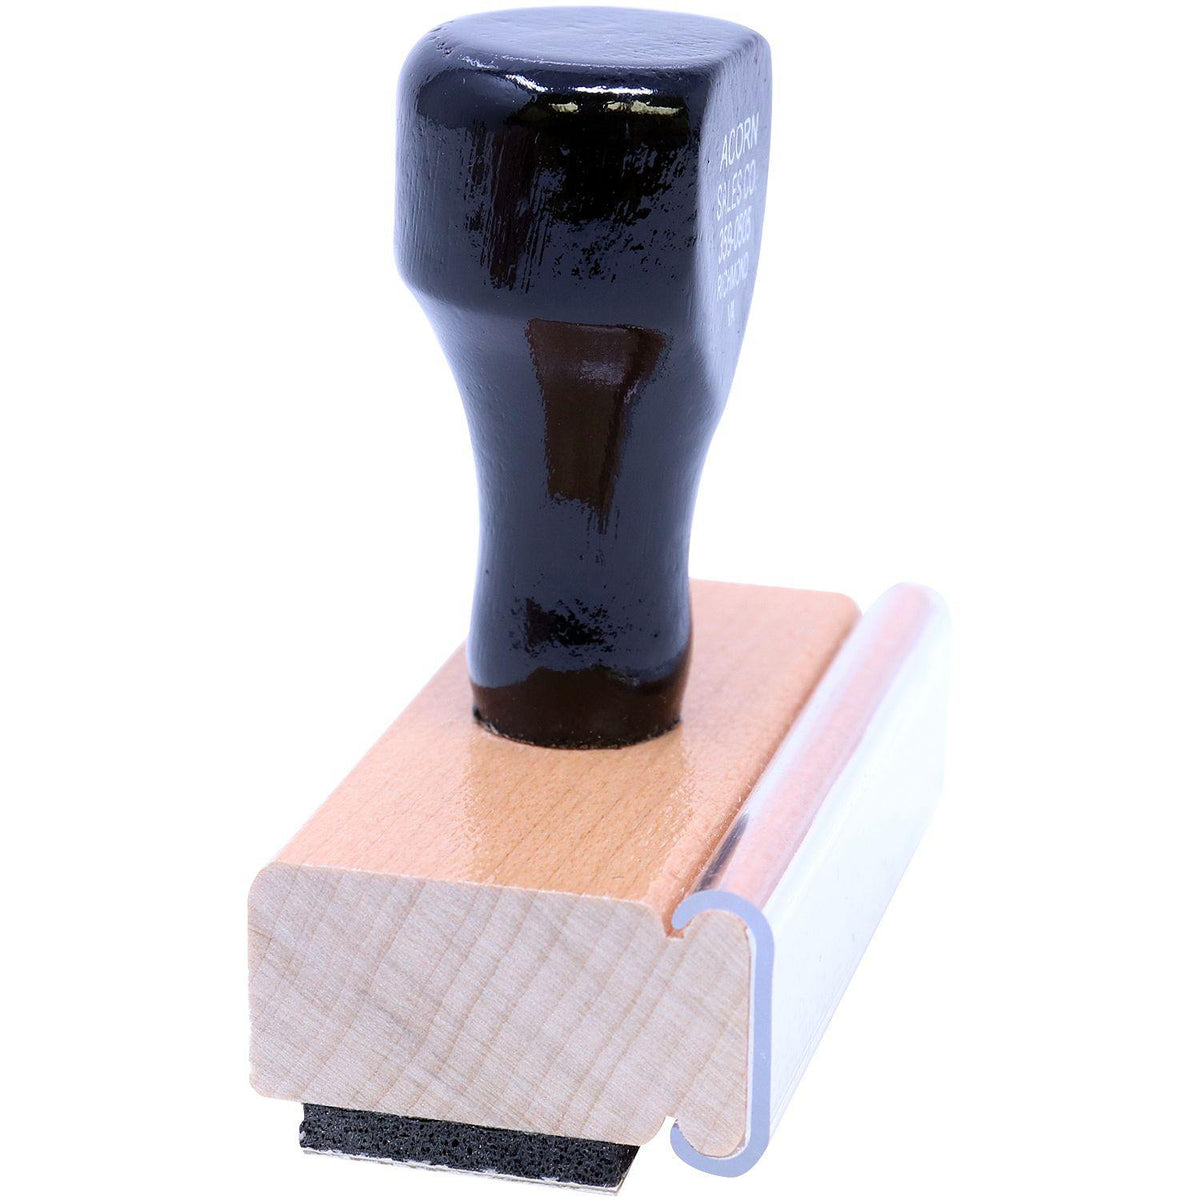 Narrow Void Rubber Stamp - Engineer Seal Stamps - Brand_Acorn, Impression Size_Small, Stamp Type_Regular Stamp, Type of Use_Office